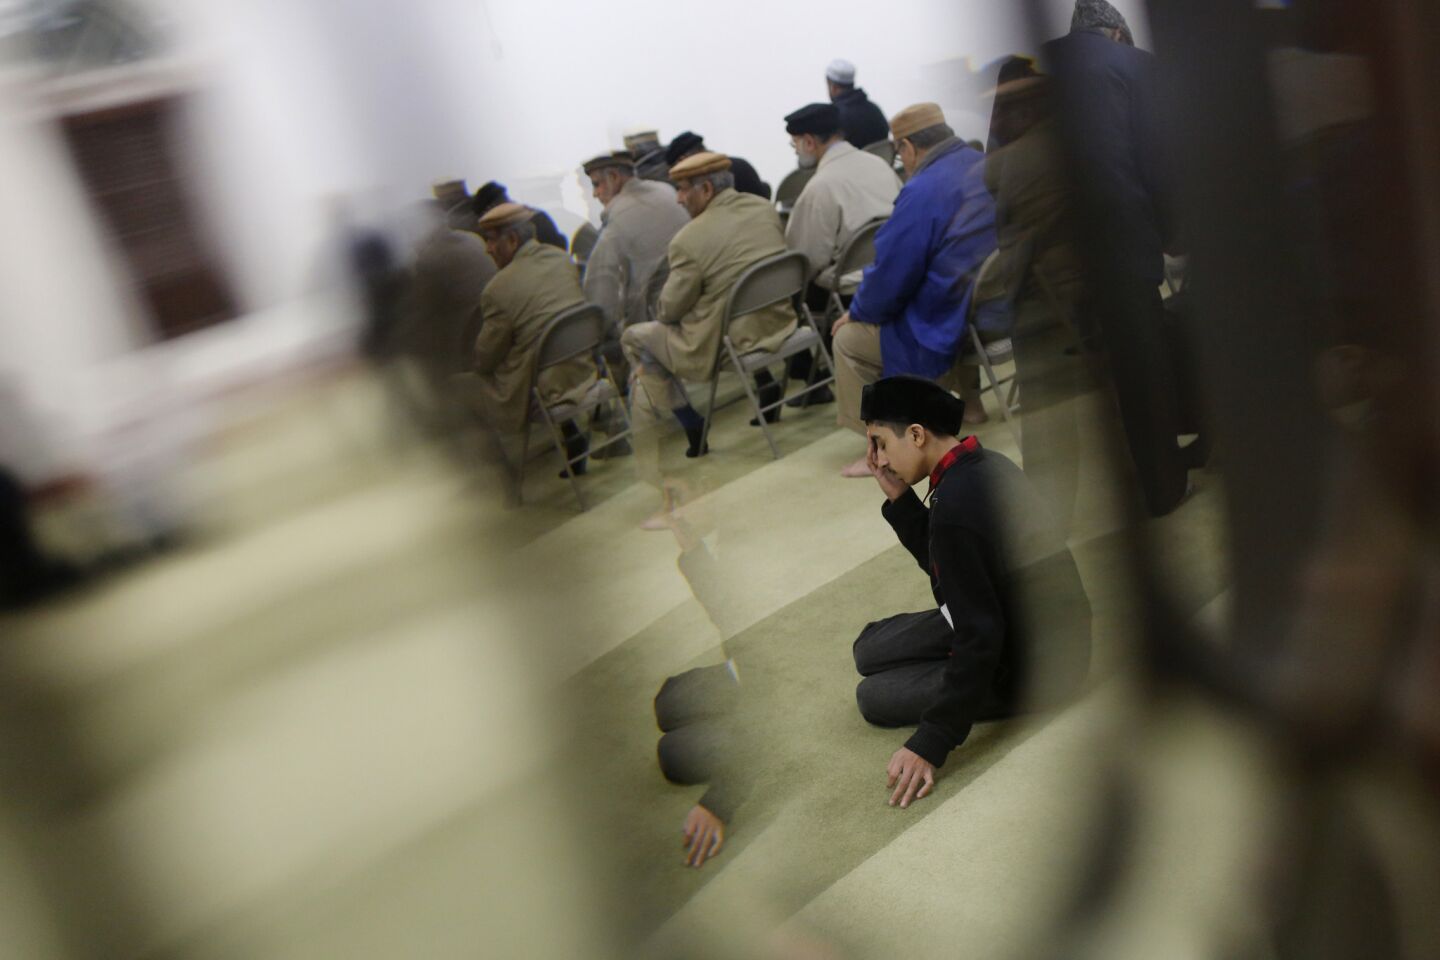 The Ahmadiyya Muslim Community USA holds a news conference and prayer vigil Dec. 3, 2015, at Baitul Hameed Mosque in Chino, Calif. The group denounced the massacre.